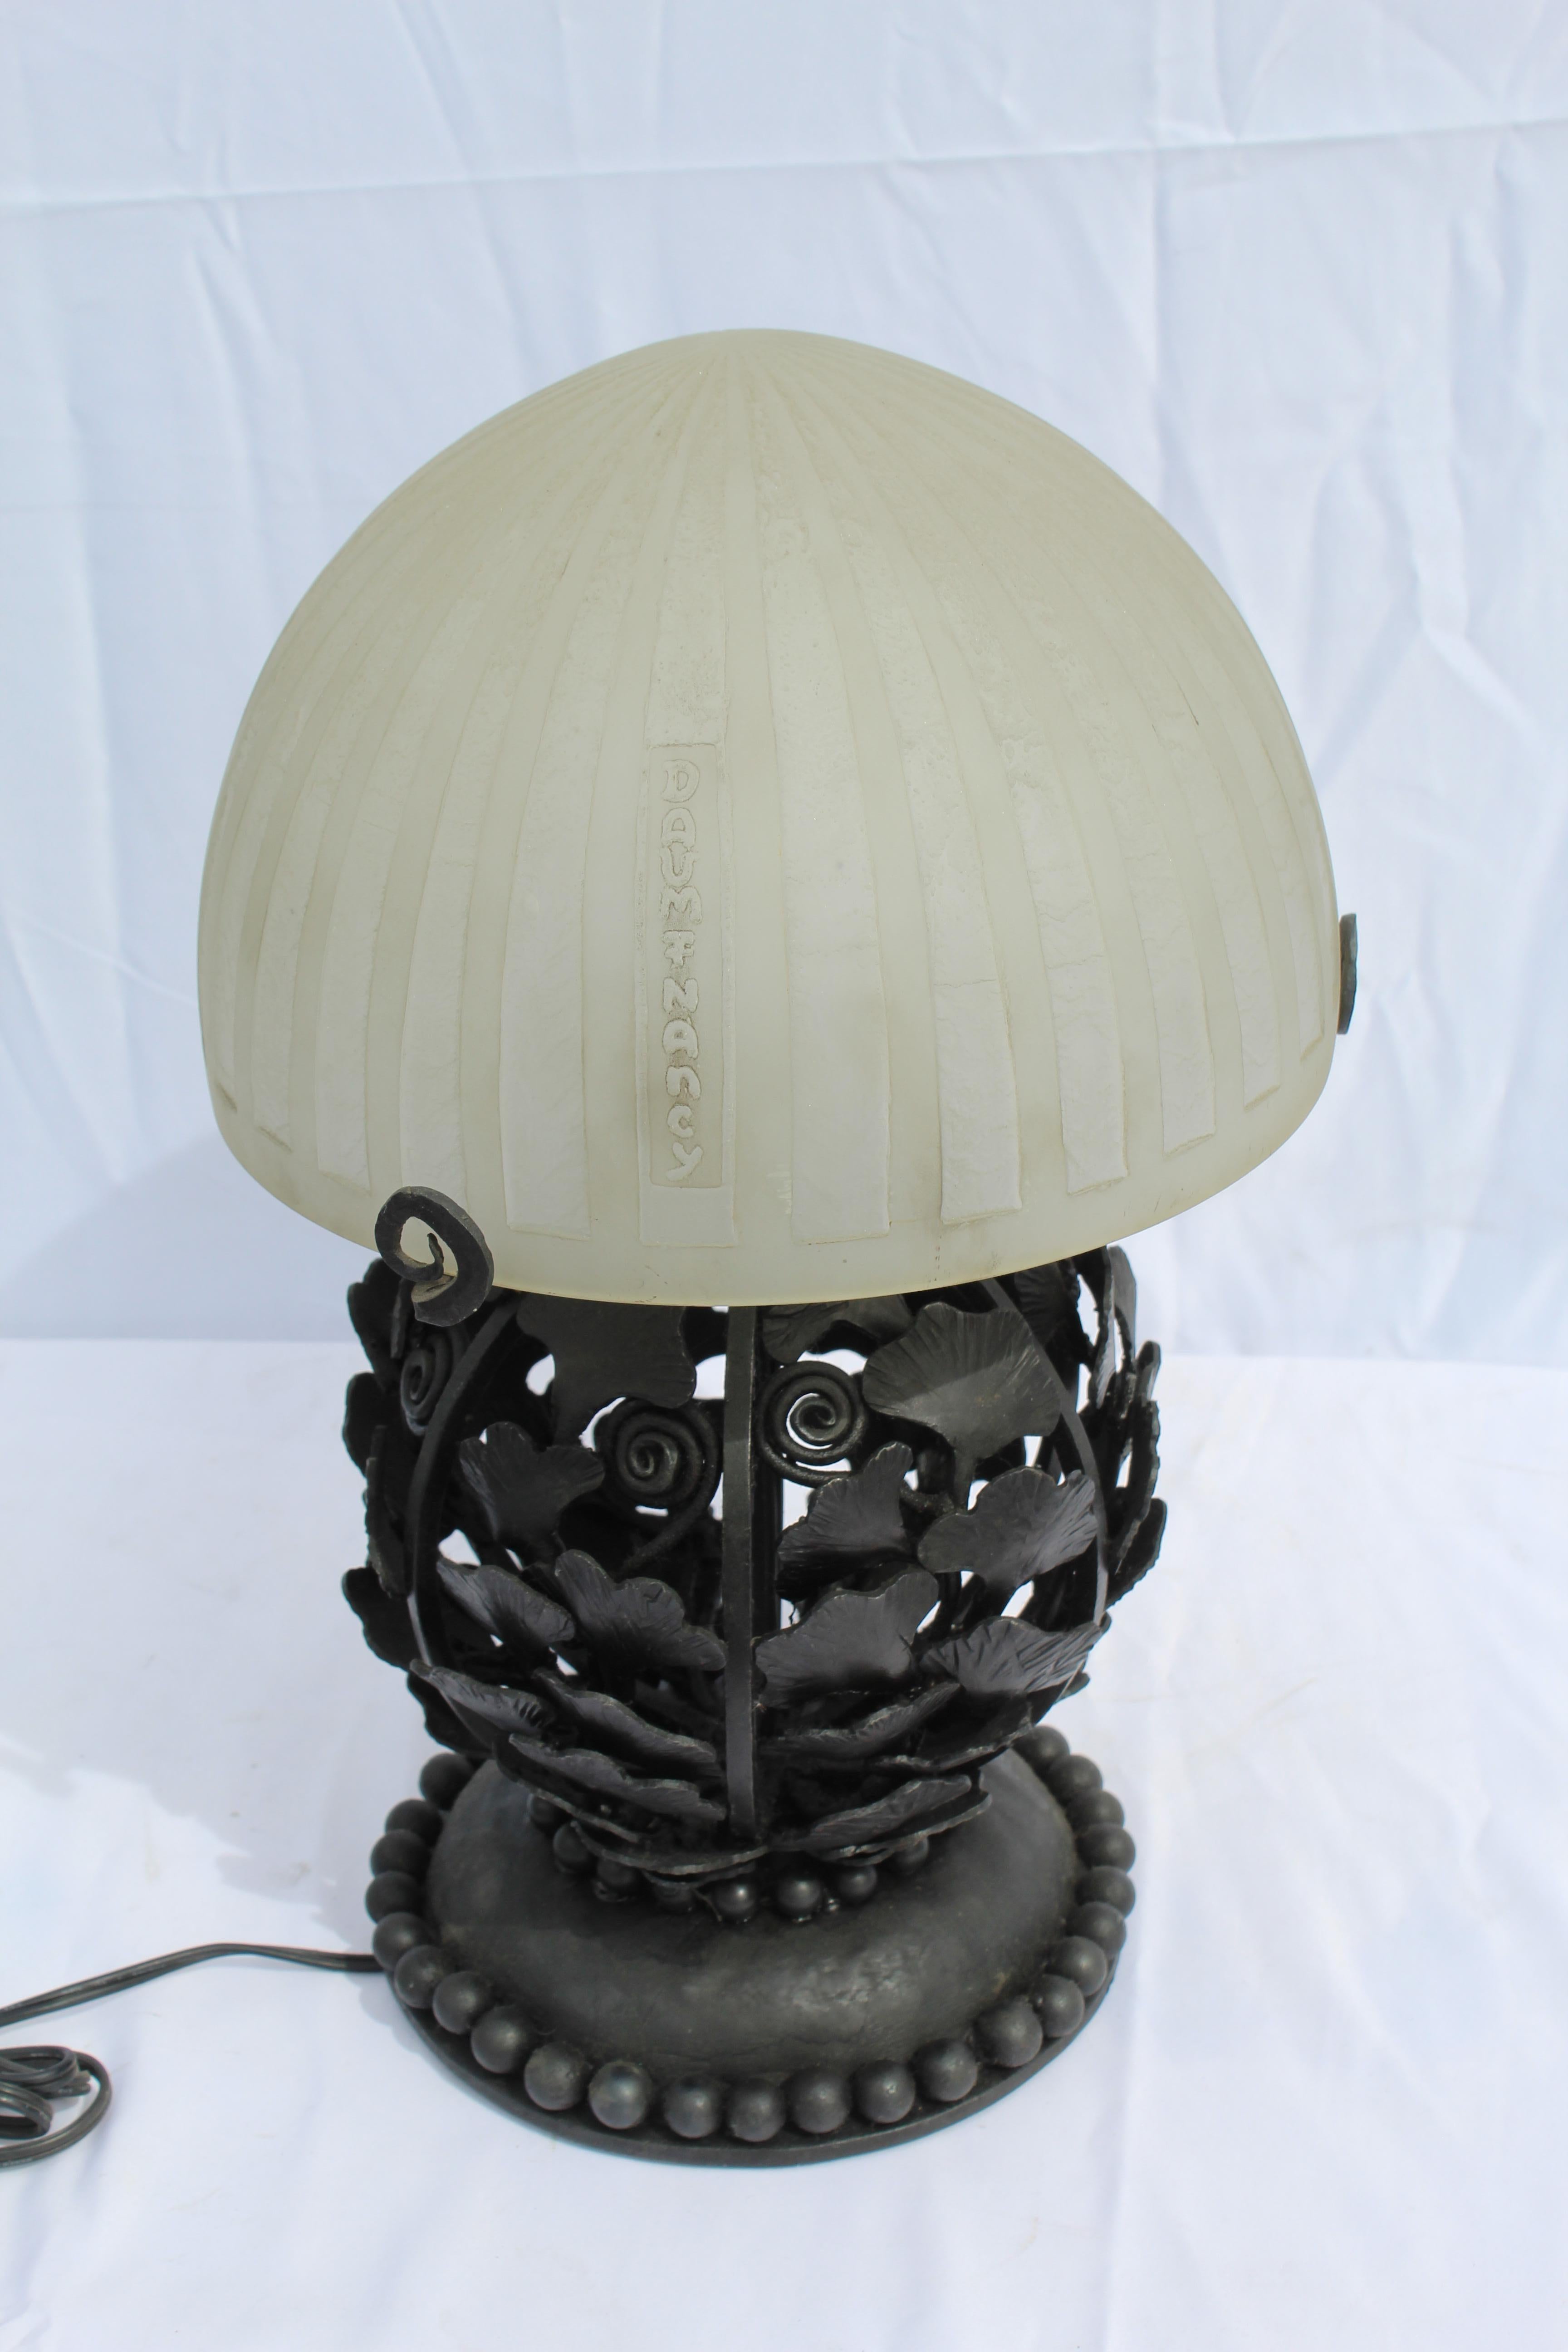 Art Deco Lamp made after the great E. Brandt and with a Daum style acid cut shade. Shade with name shown. All after the original. Excellent metal work of Ginko leaves. Heavy base . From a private Art Deco collector. This is a very rare style of Deco